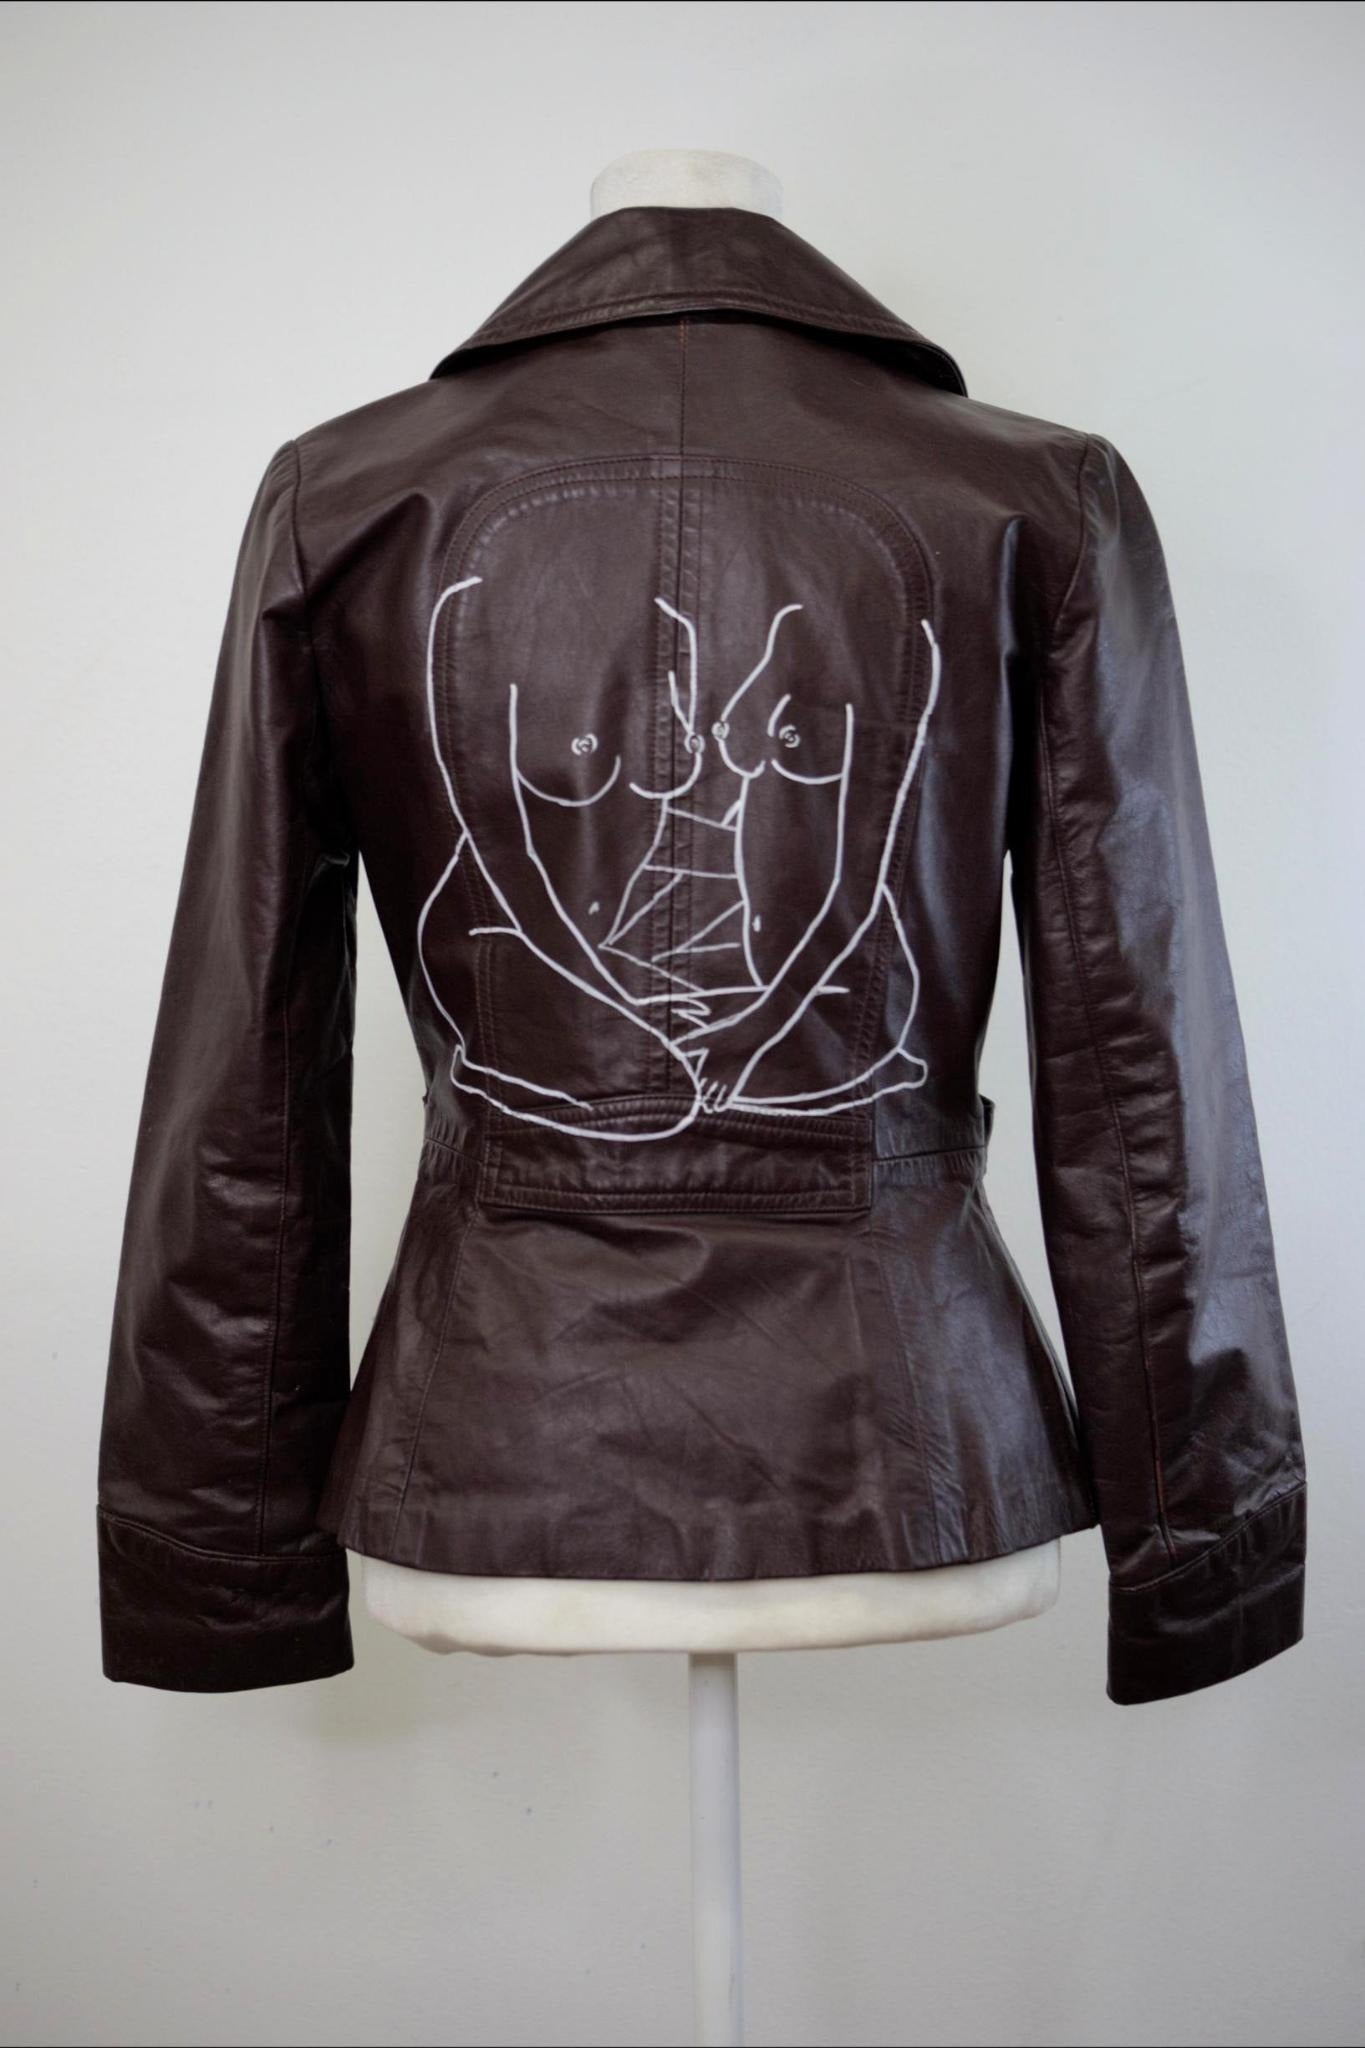 'Lovers' Linework Hand-Painted Leather Jacket